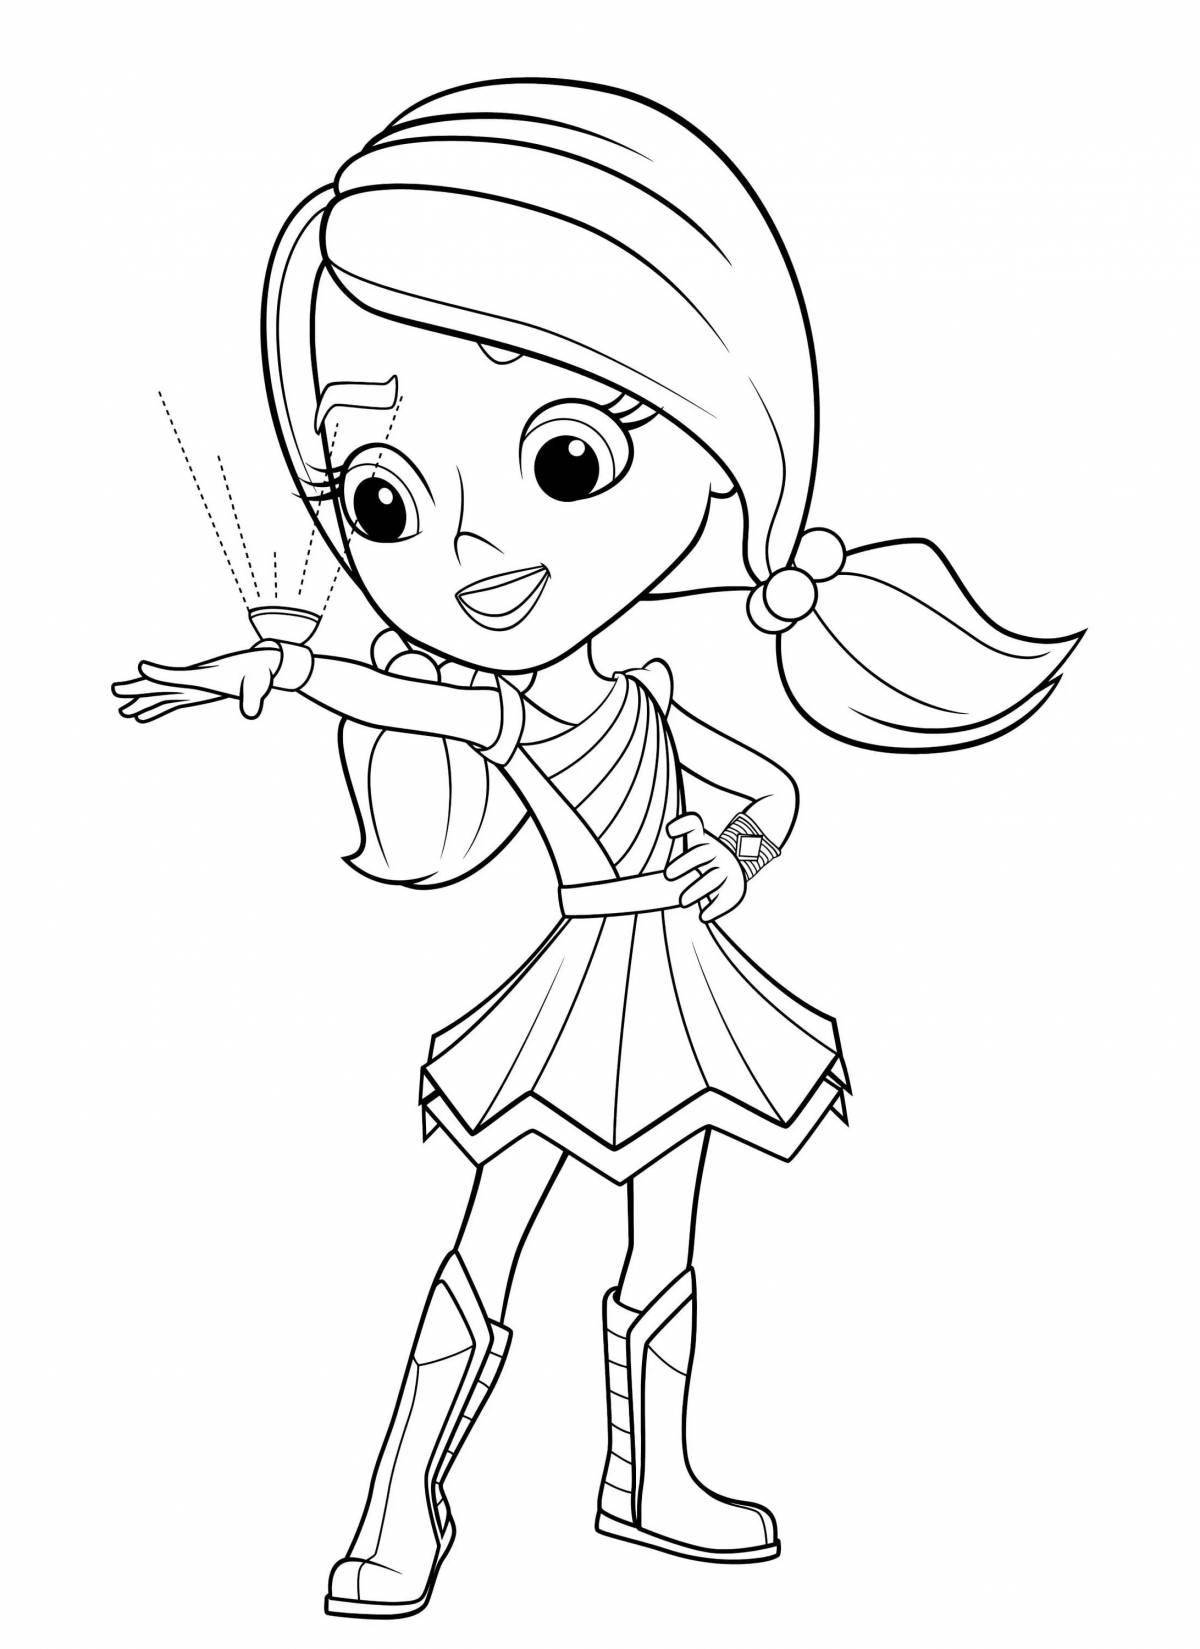 Fairy glitter coloring pages for kids